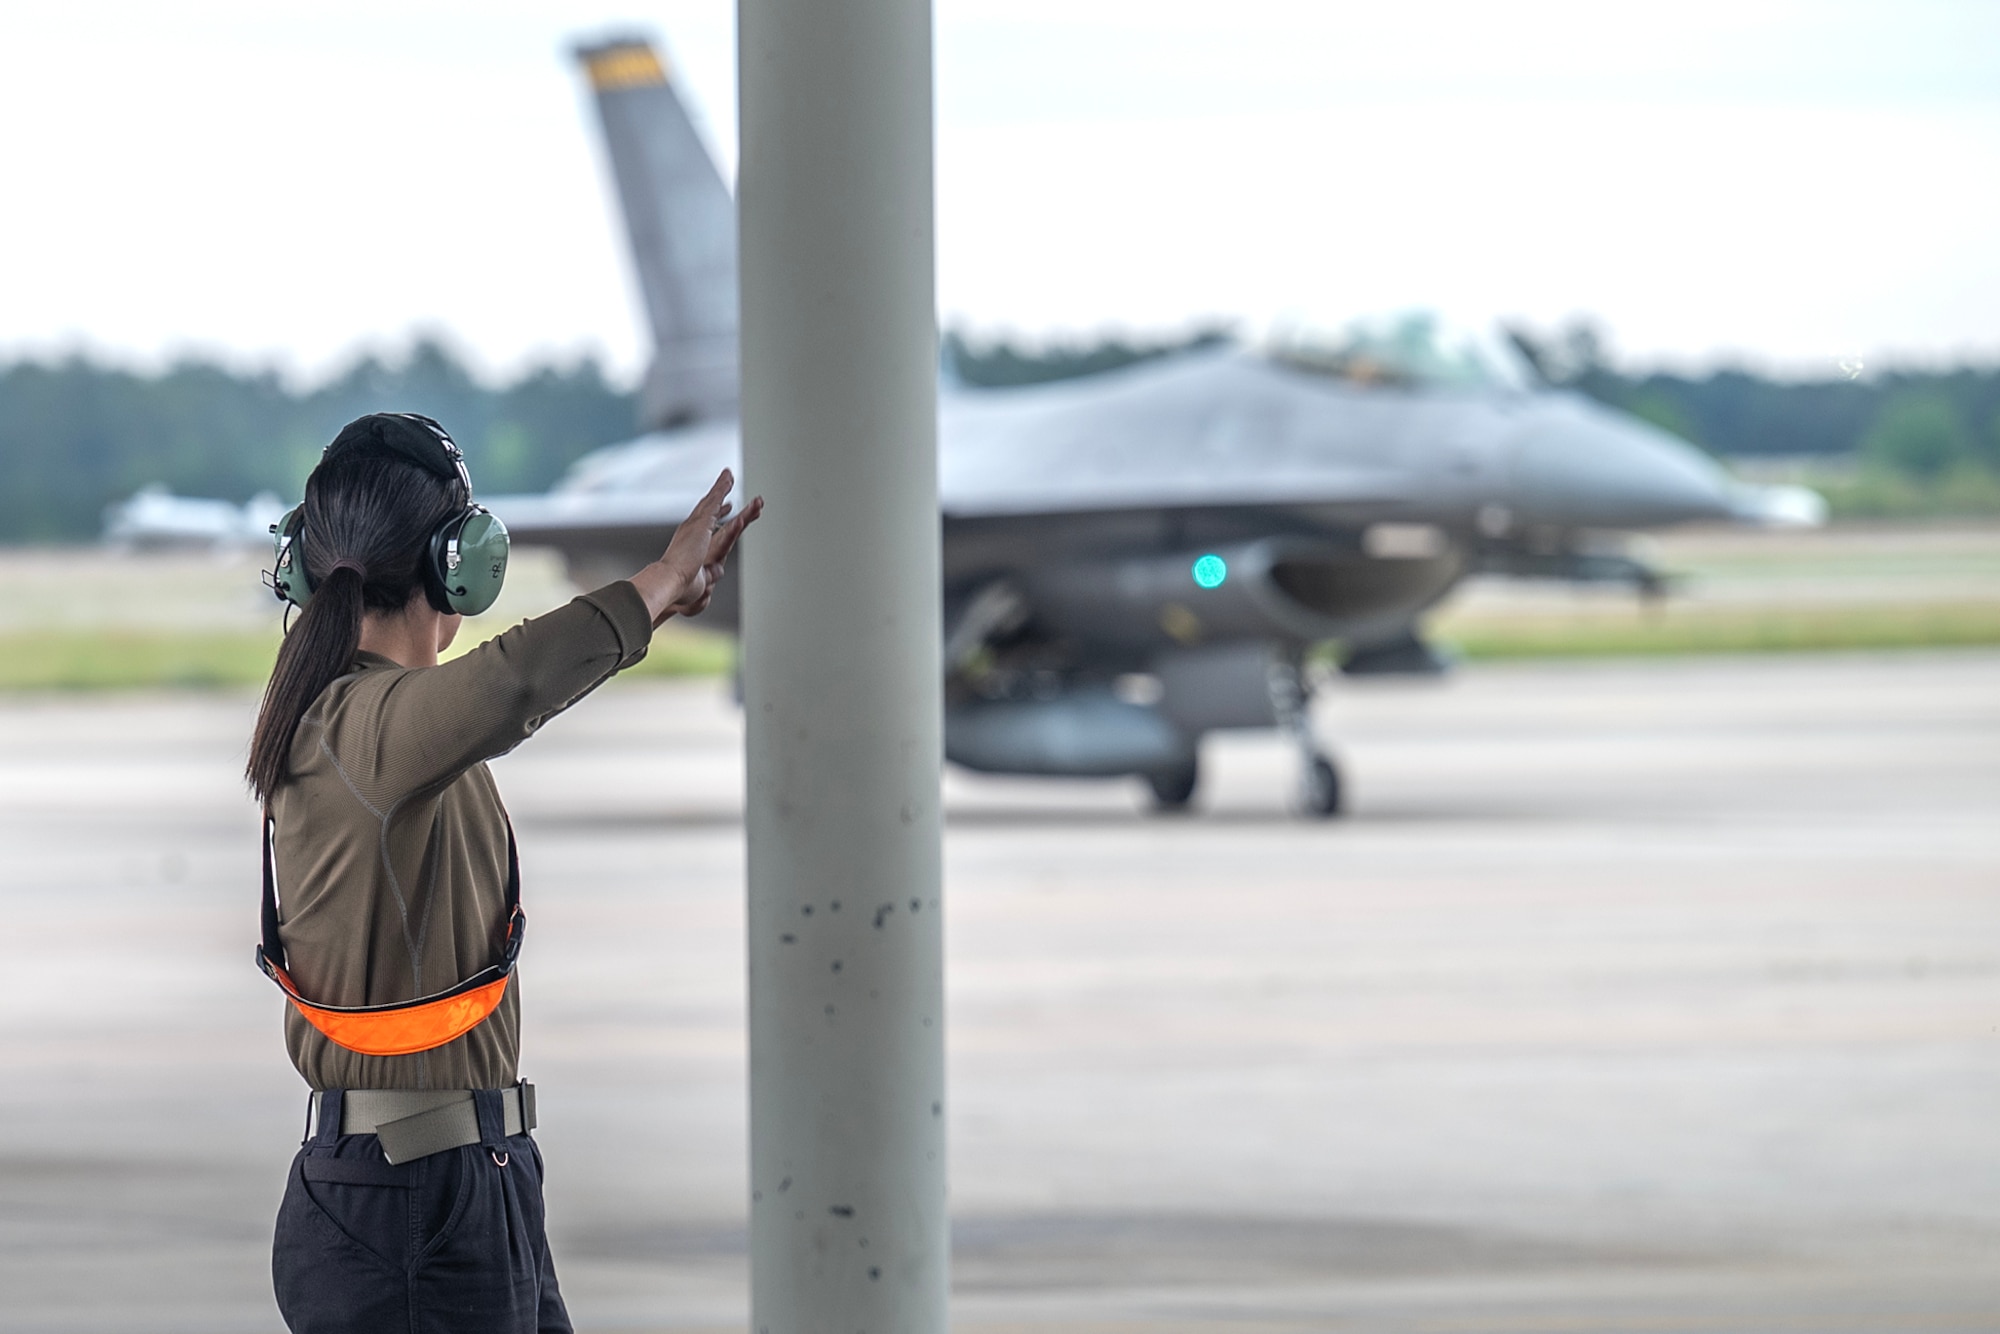 A1C Kindle, 79th FGS, guides Lt. Gen. Grynkewich, 9th AF (AFCENT) commander, to his parking spot as he completes his final flight as AFCENT commander.